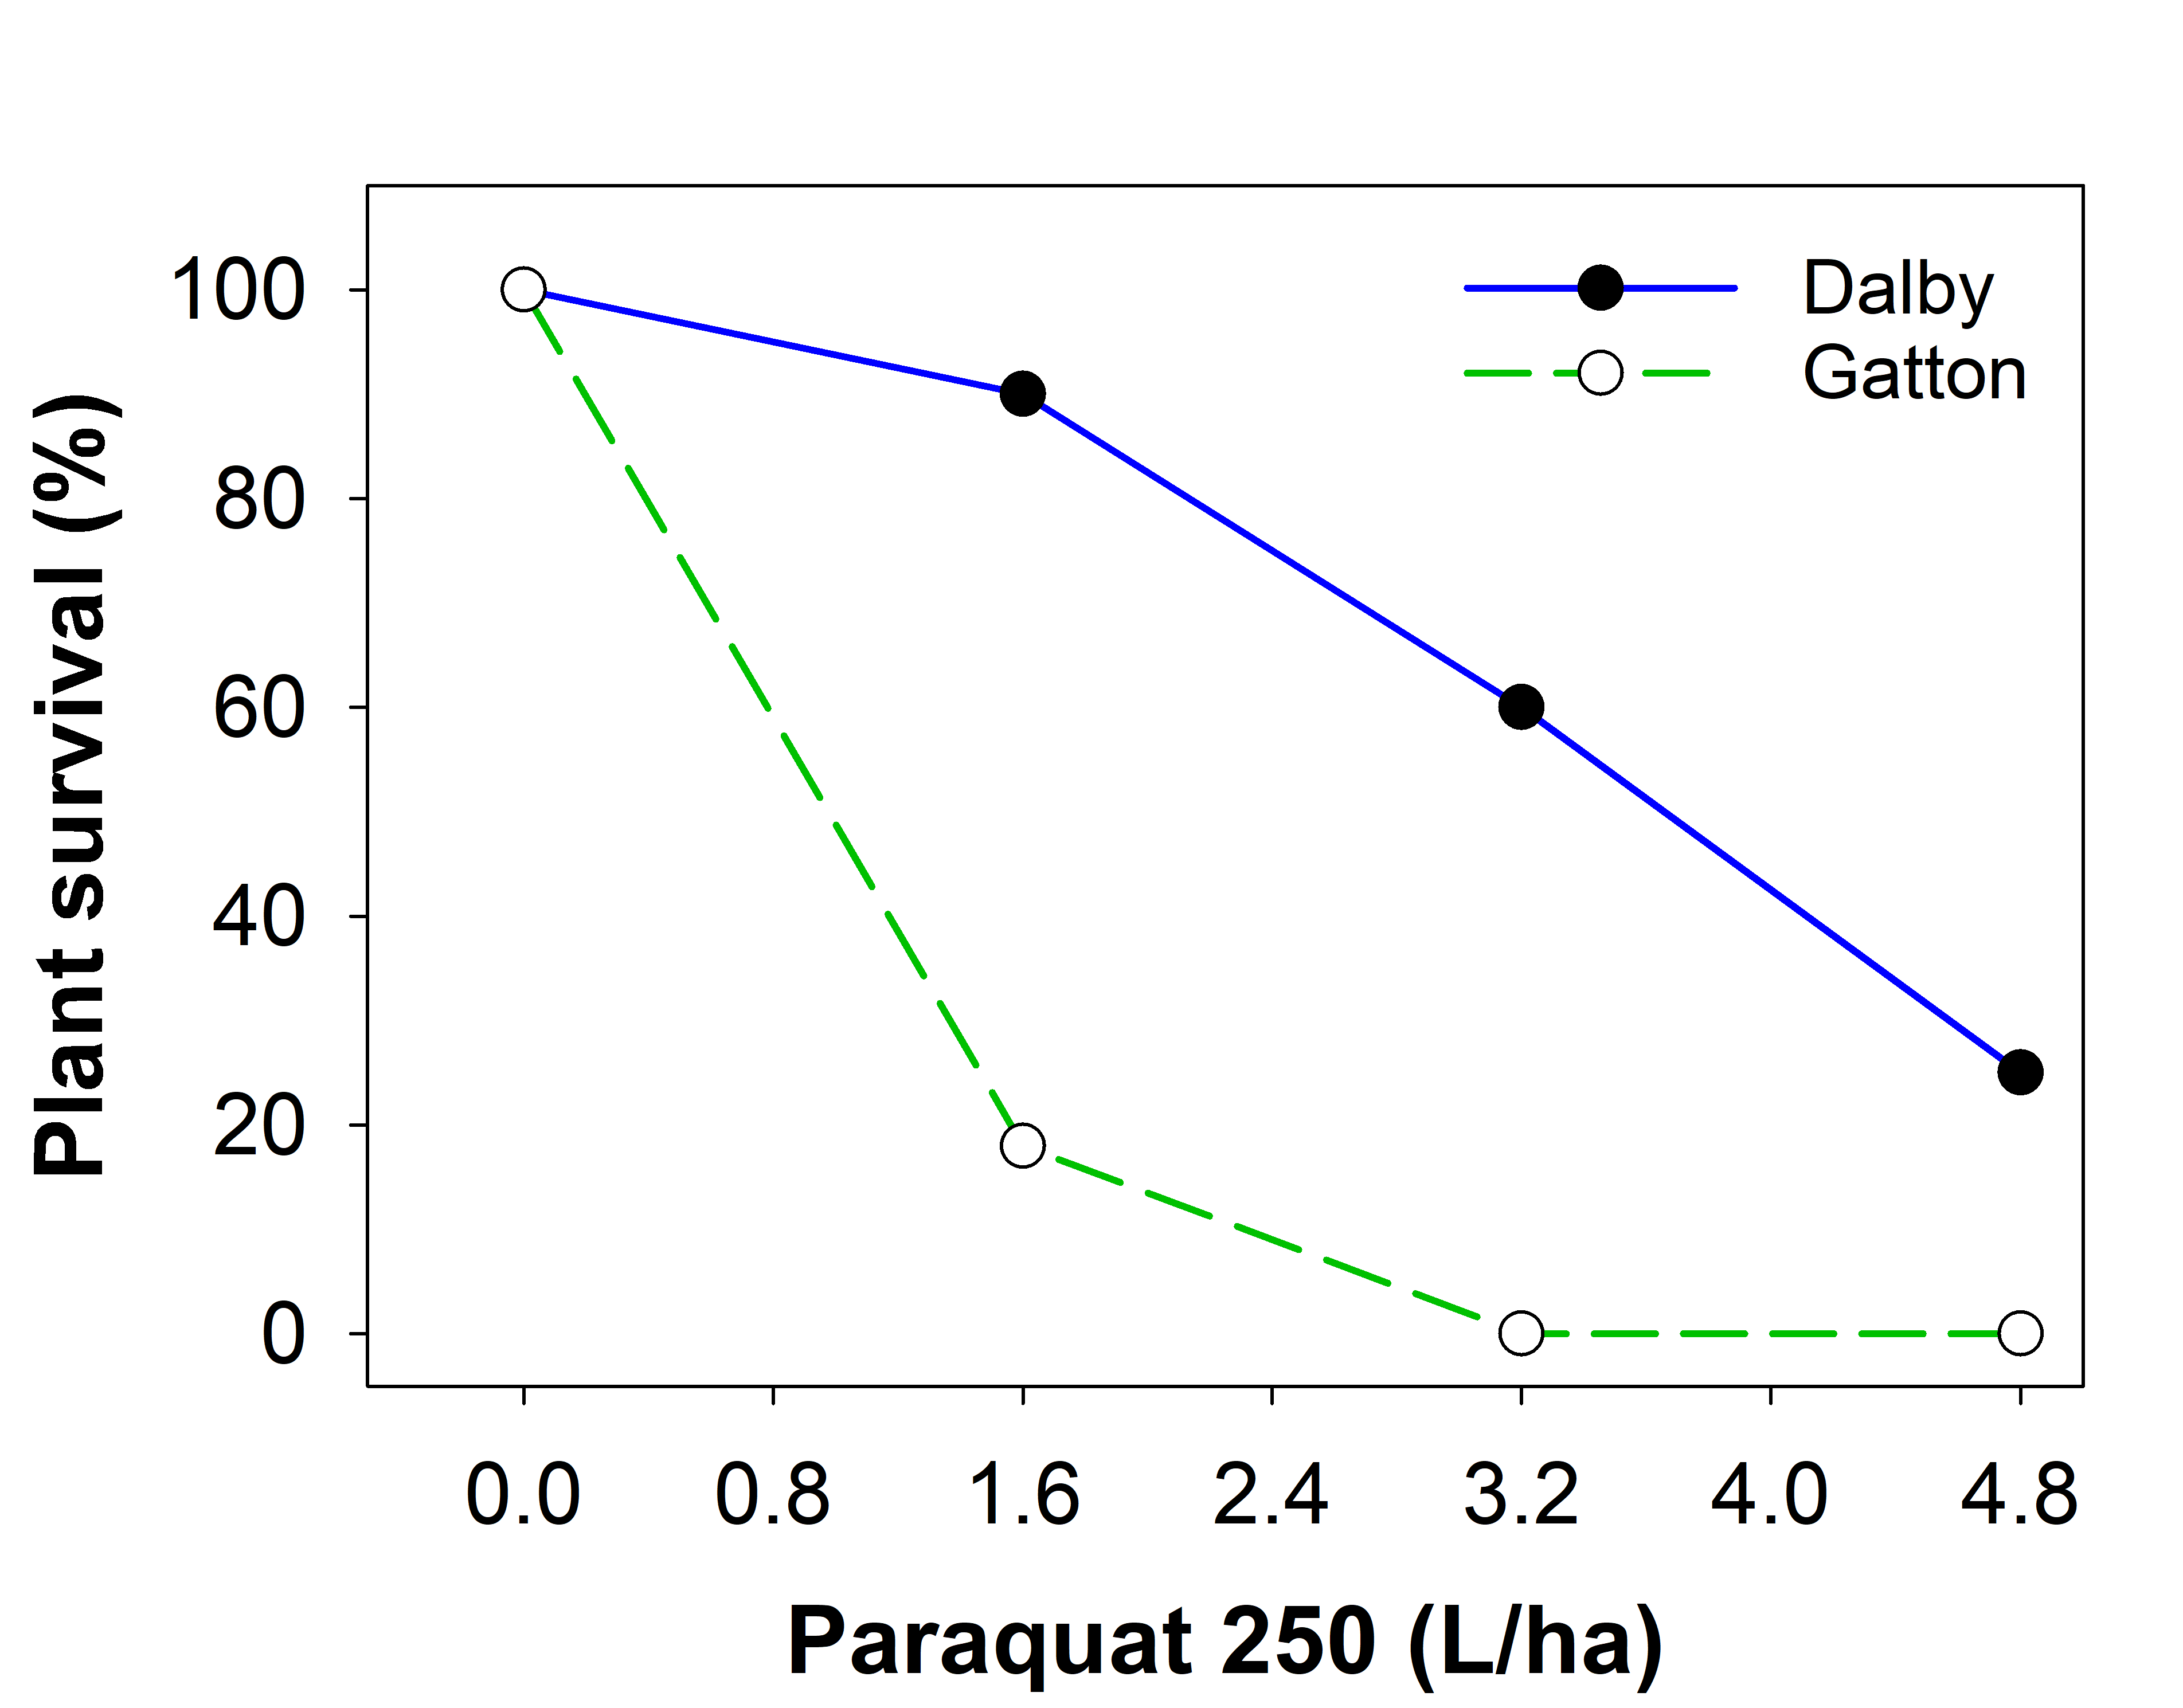 The line graph shows the effect of paraquat (250 g ai/L) (L/ha) dose on plant survival (as a % of the untreated control treatment) of the Dalby and Gatton populations of tall fleabane